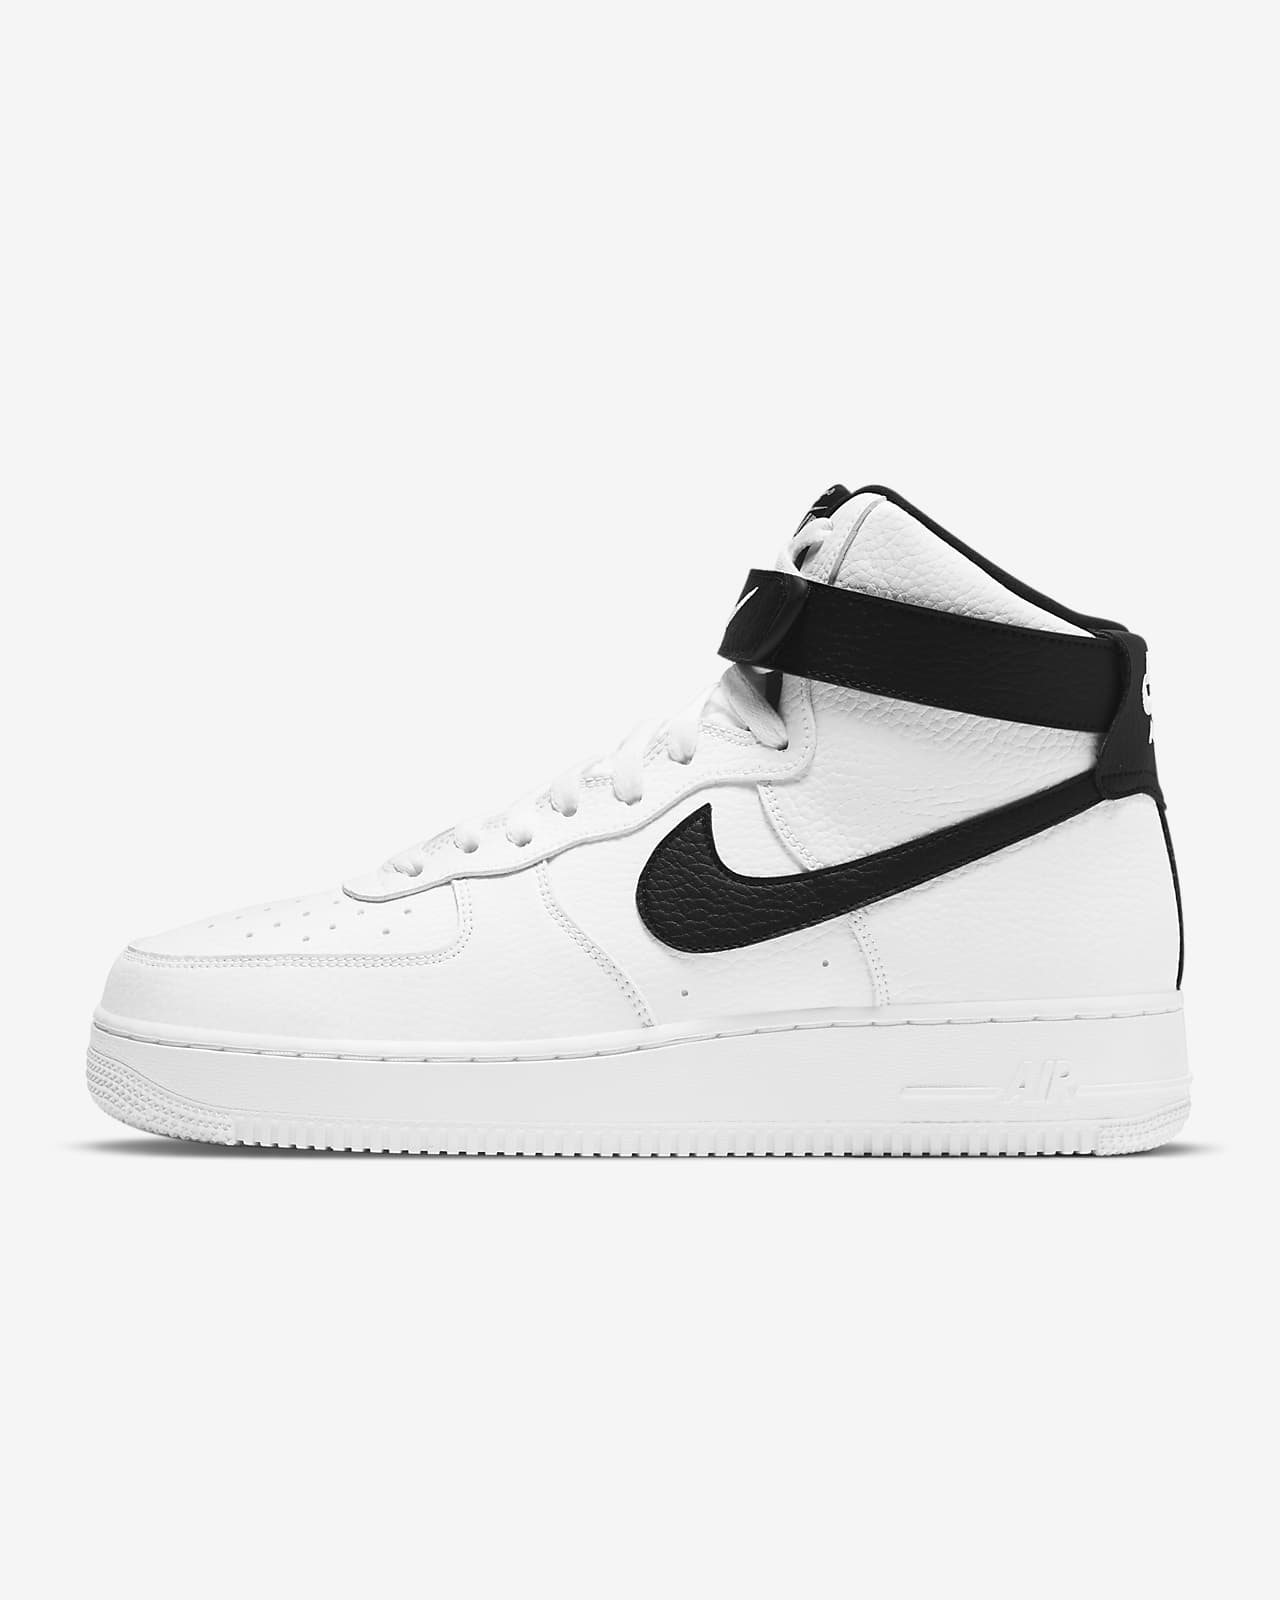 Nike Air Force 1 '07 High Men's Shoes